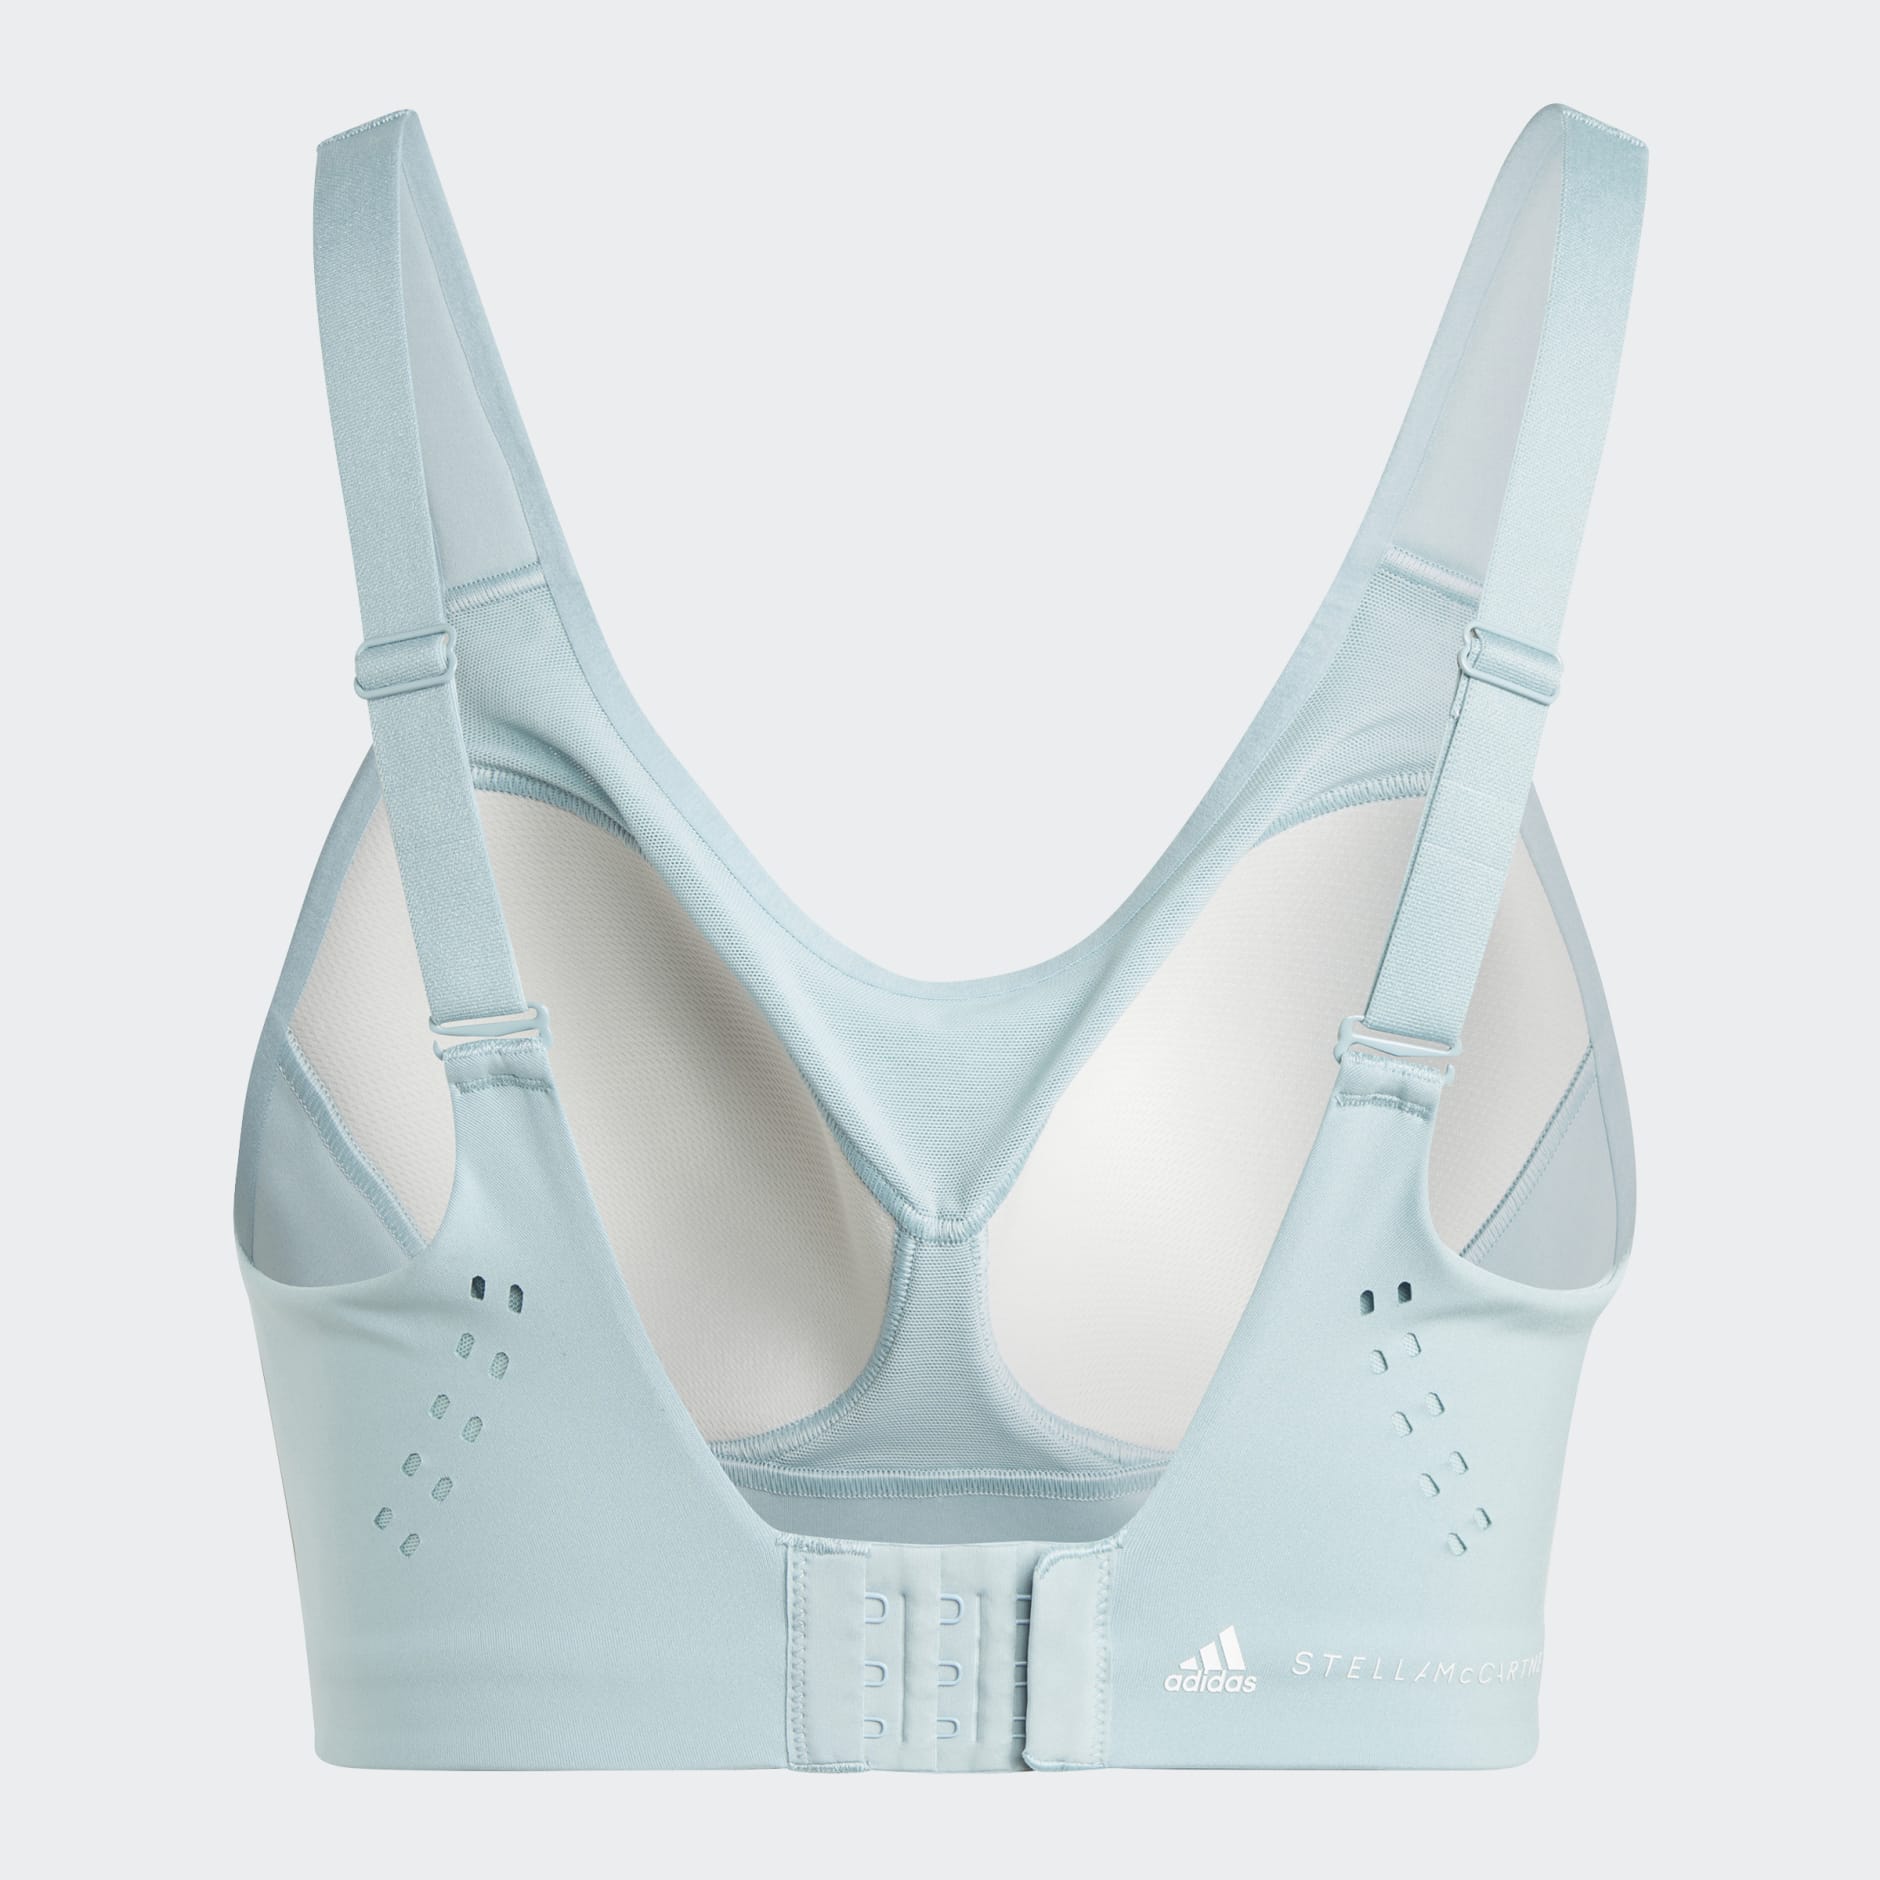 adidas by Stella McCartney Bras: High support for women online - Buy now at